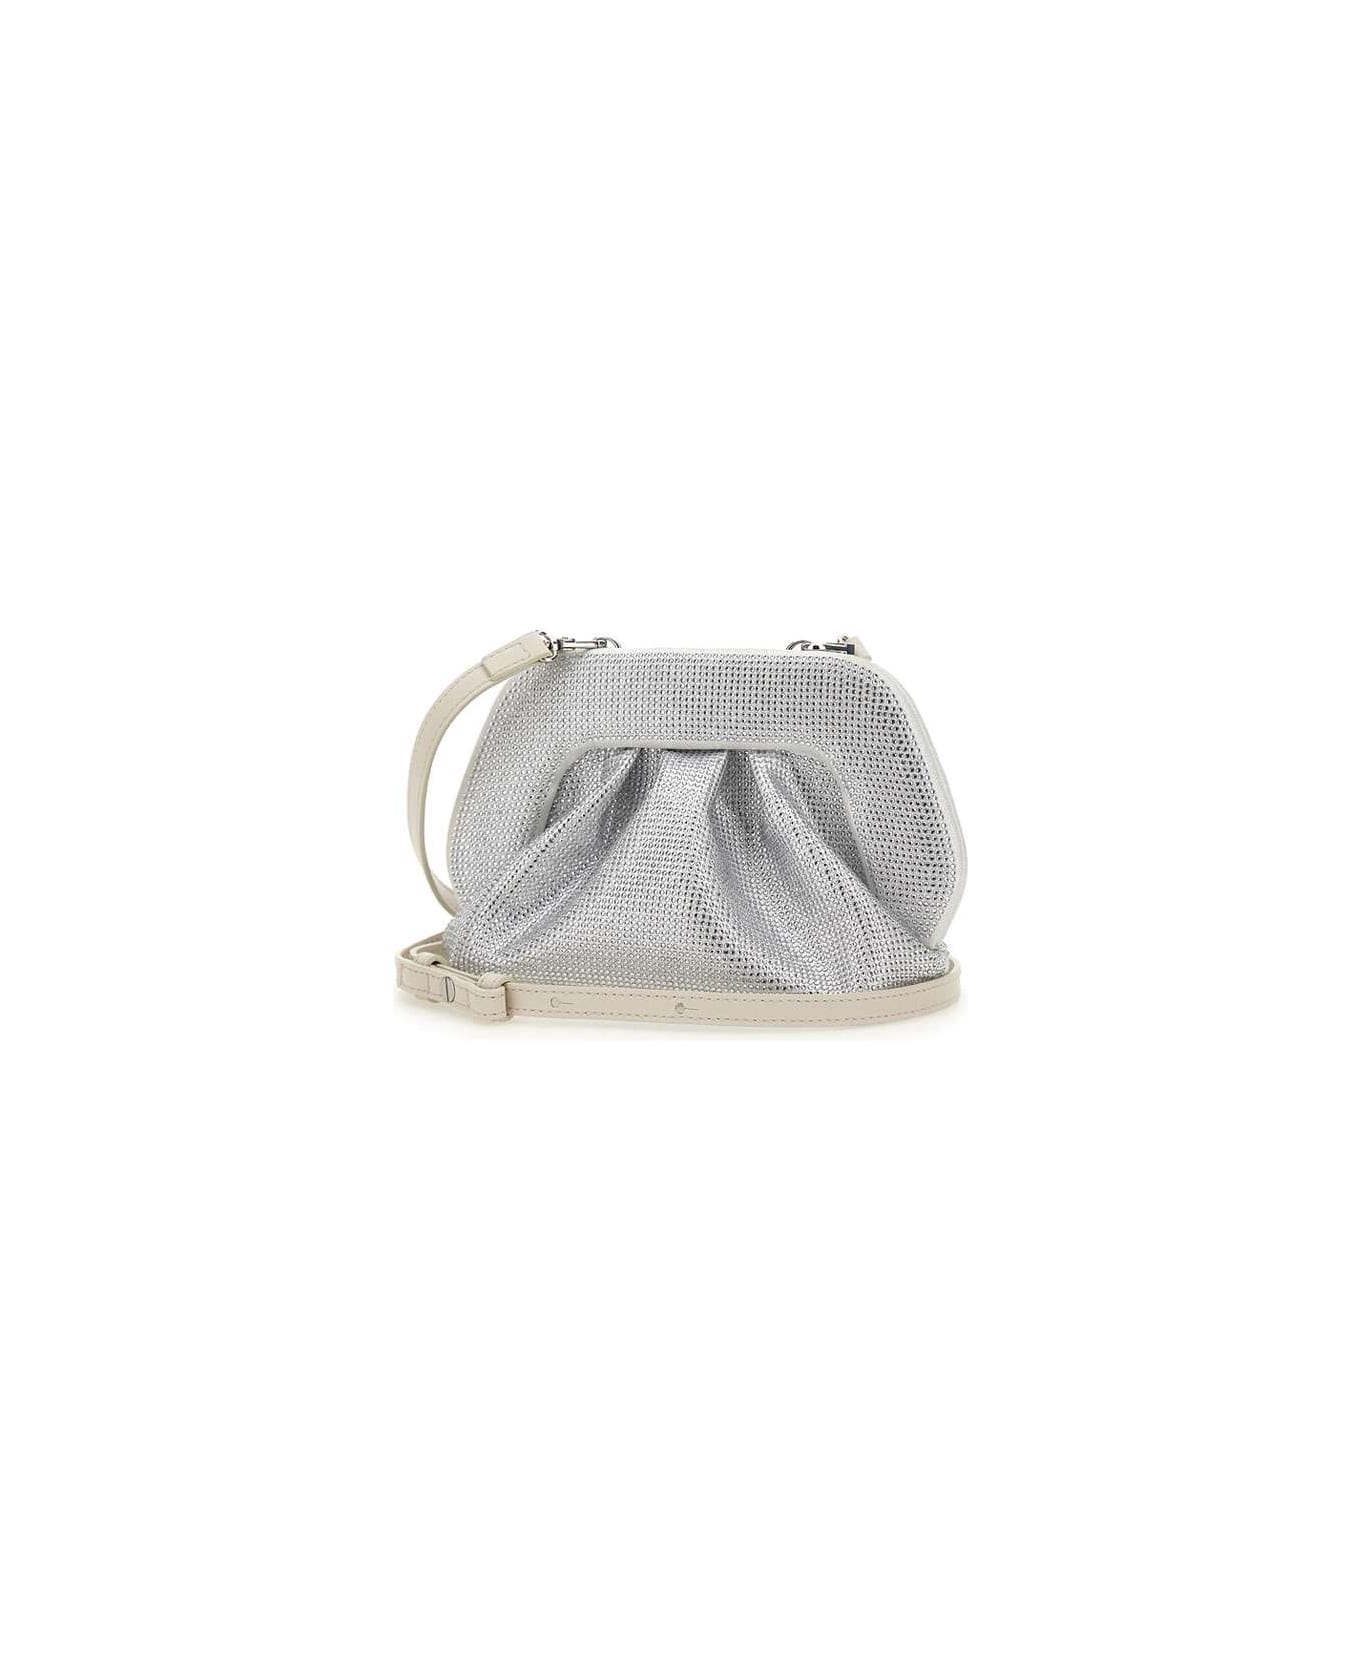 THEMOIRè "gea Strass" Vegan Leather Clutch Bag - SILVER クラッチバッグ